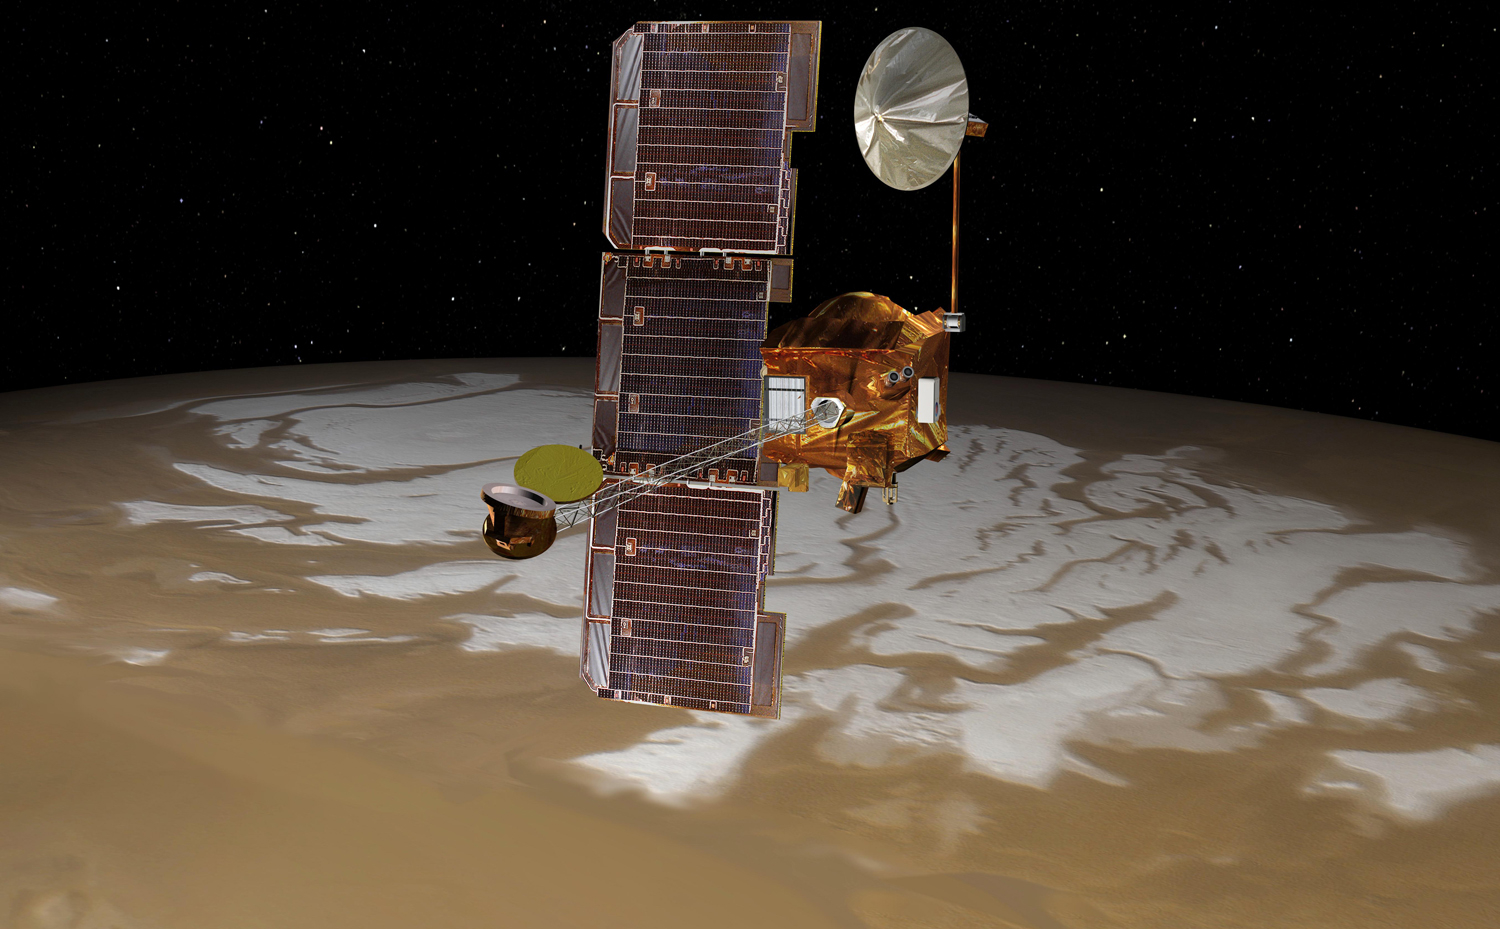 NASA's Mars Odyssey spacecraft passes above Mars' south pole in this artist's concept illustration. The spacecraft has been orbiting Mars since October 24, 2001.